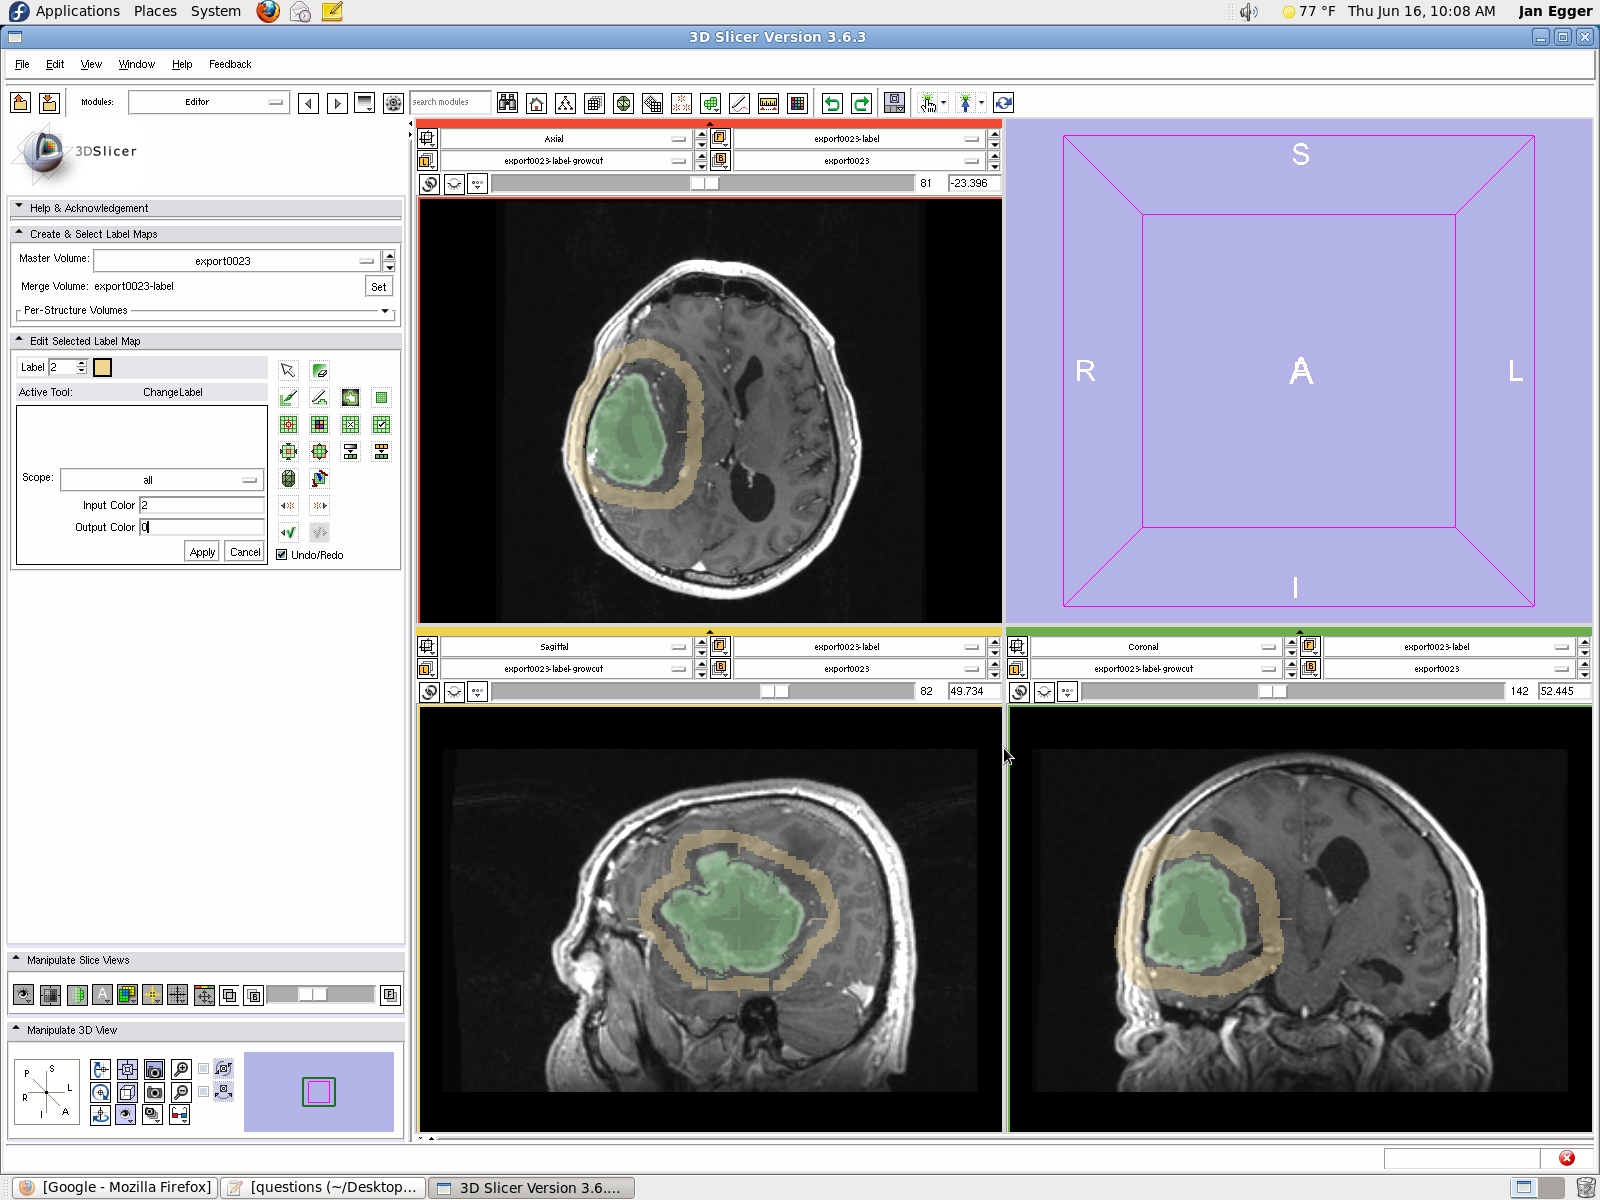 An example segmentation obtained for a challenging case of GBM from Marburg